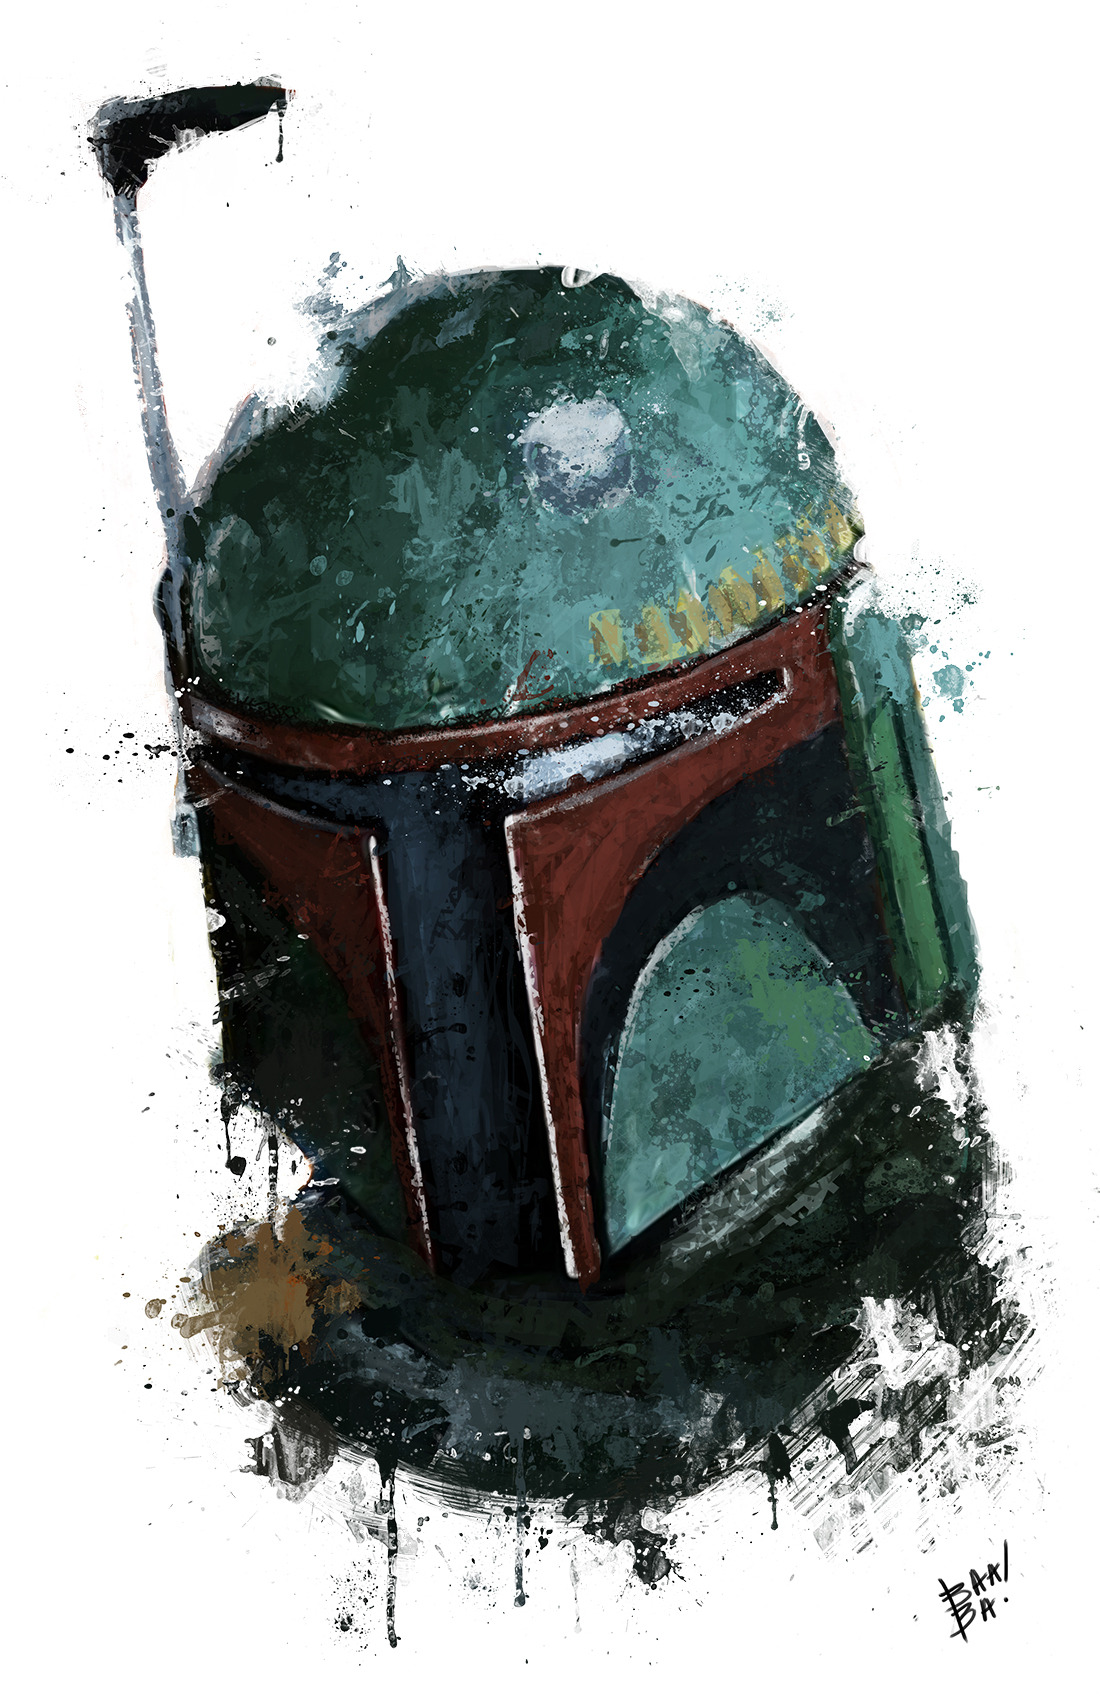 A Boba Fett painting I did. You can purchase this piece and more at my etsy. https://www.etsy.com/shop/ArtofAnthonySalinas